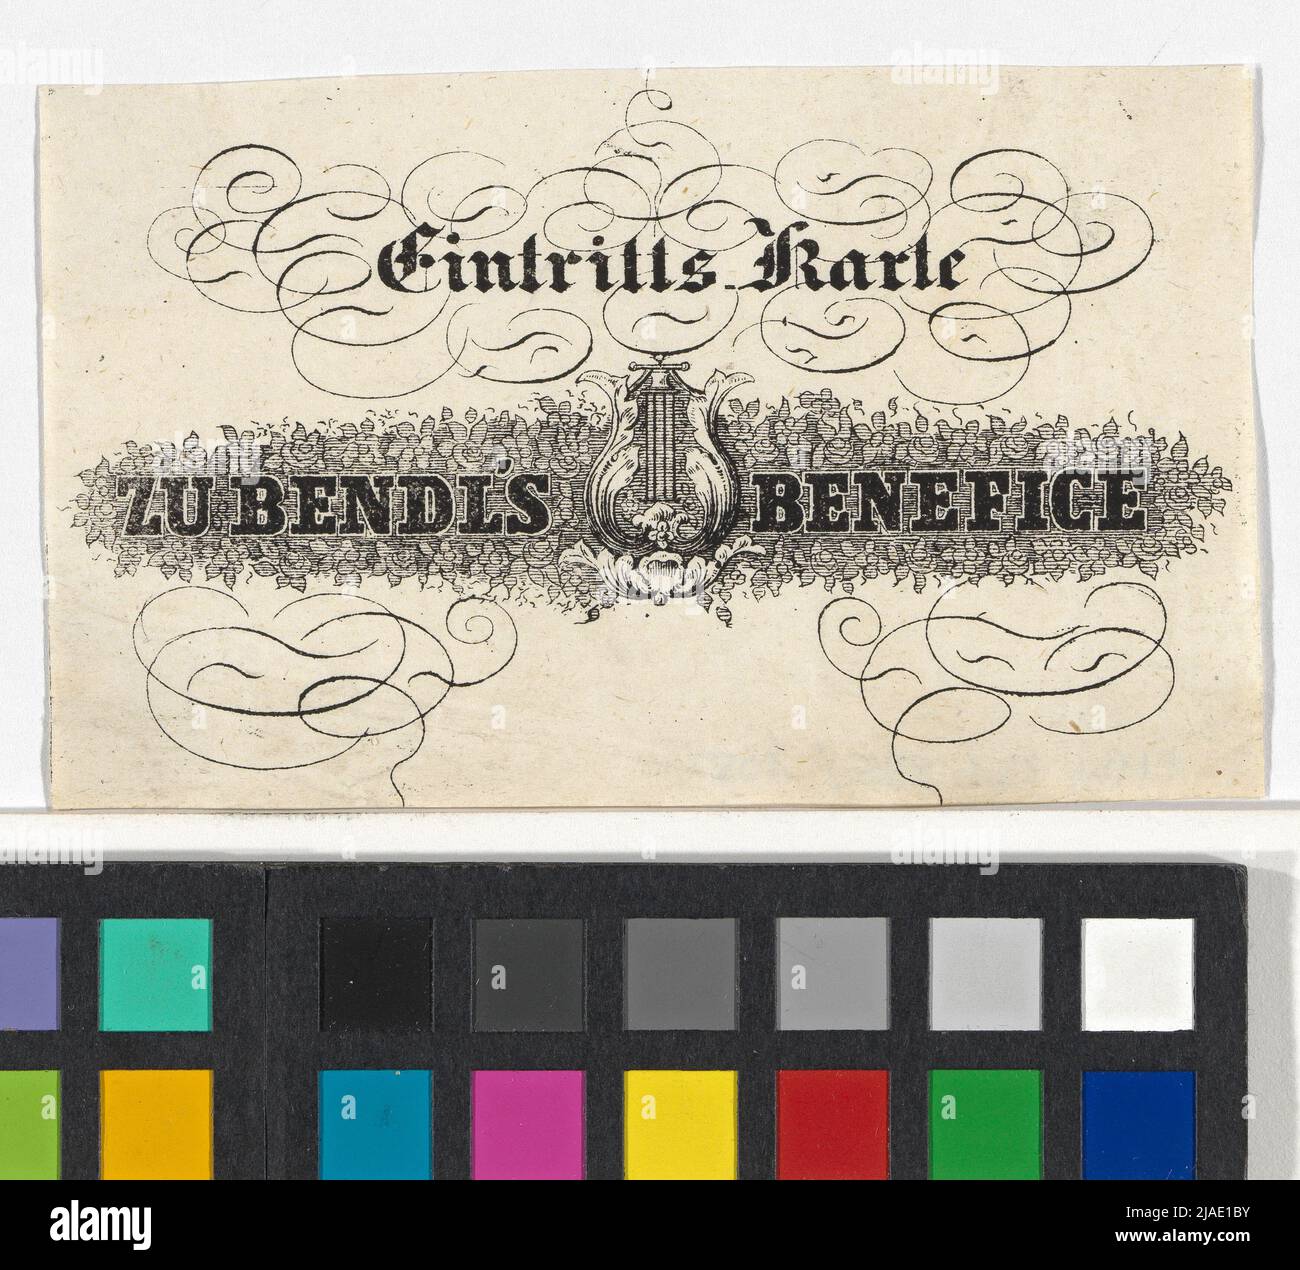 Admission ticket 'To Bendl's Benefice', a benefit ball in the Apollo Hall. Unknown Stock Photo